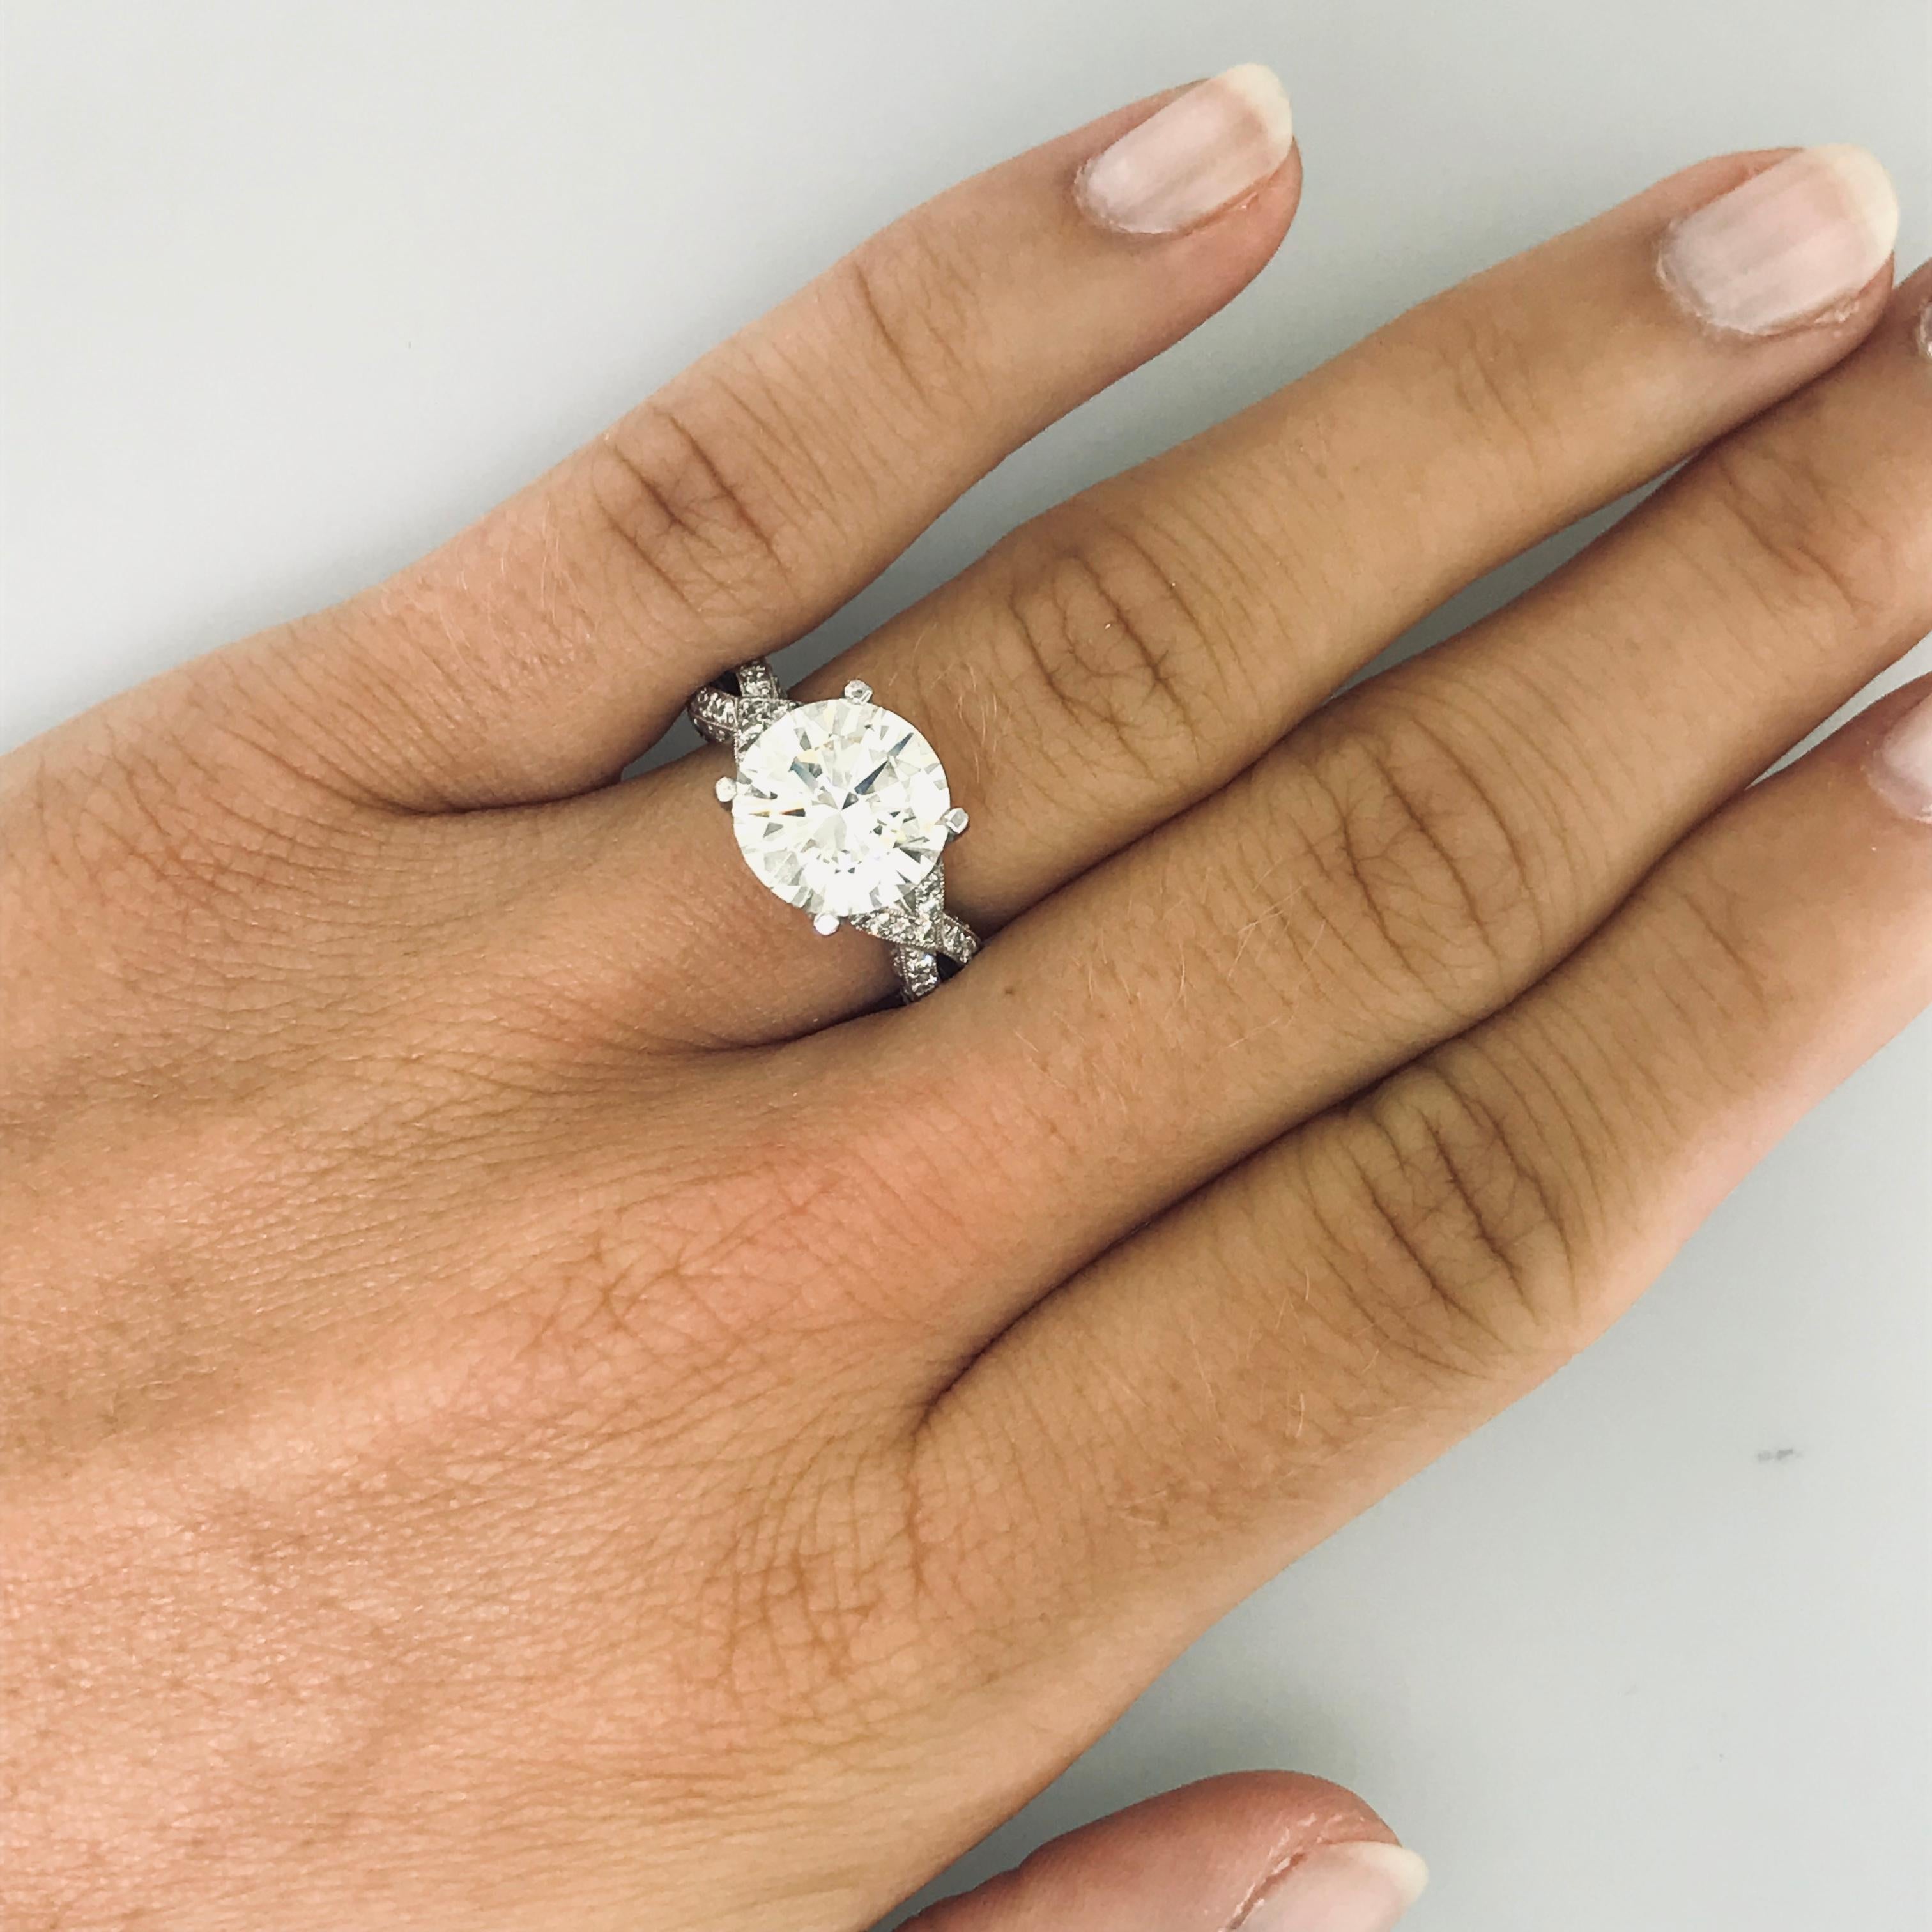 This iconic platinum diamond ring is a Tacori Royal T stunner!  The 4.00 carat round diamond is GIA-certified. The Tacori Royal T designed ring has an open criss-cross woven infinity design on the shoulders and small accent diamonds are pave-set